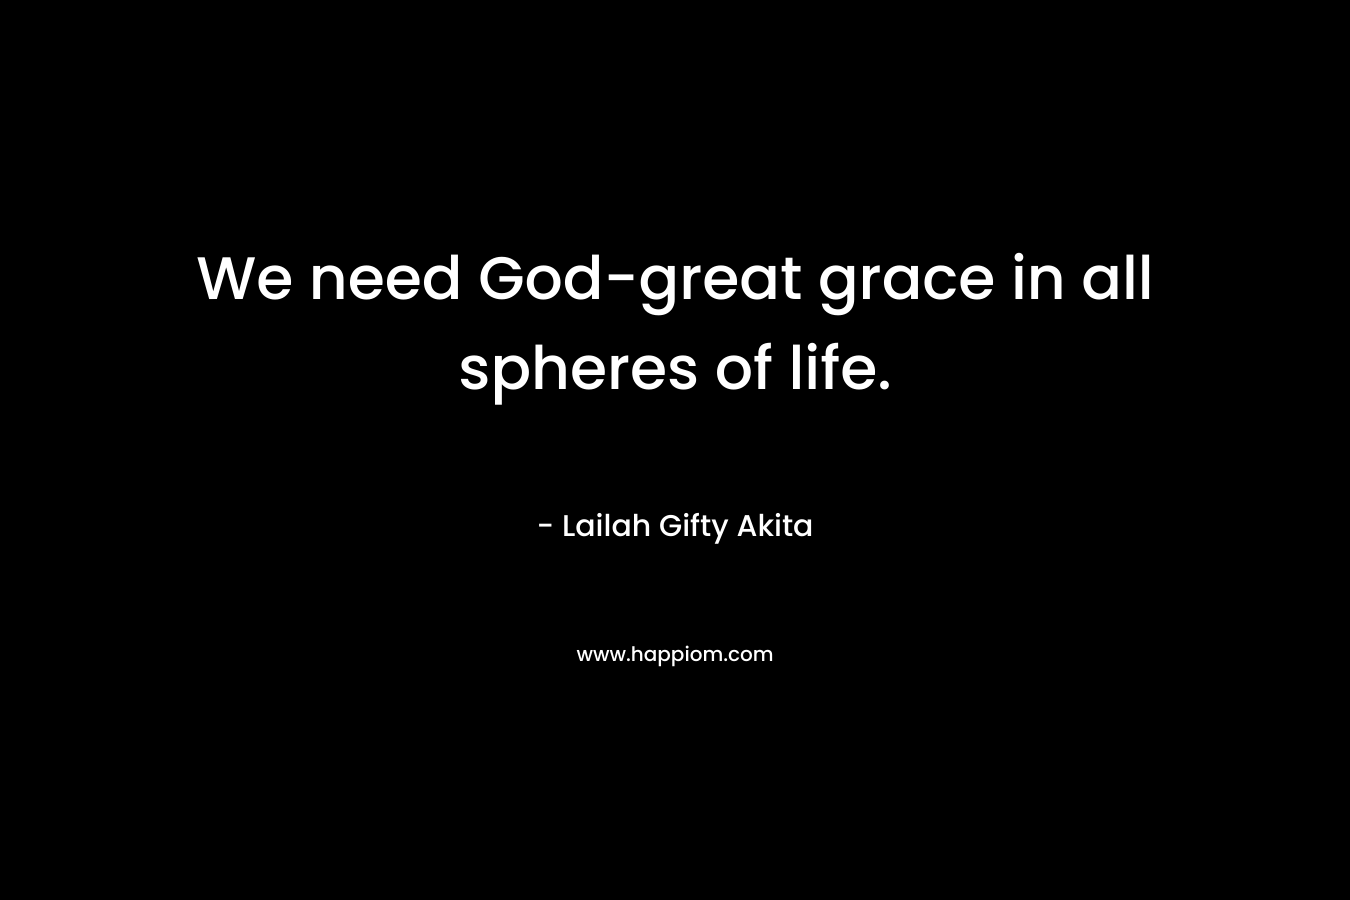 We need God-great grace in all spheres of life. – Lailah Gifty Akita